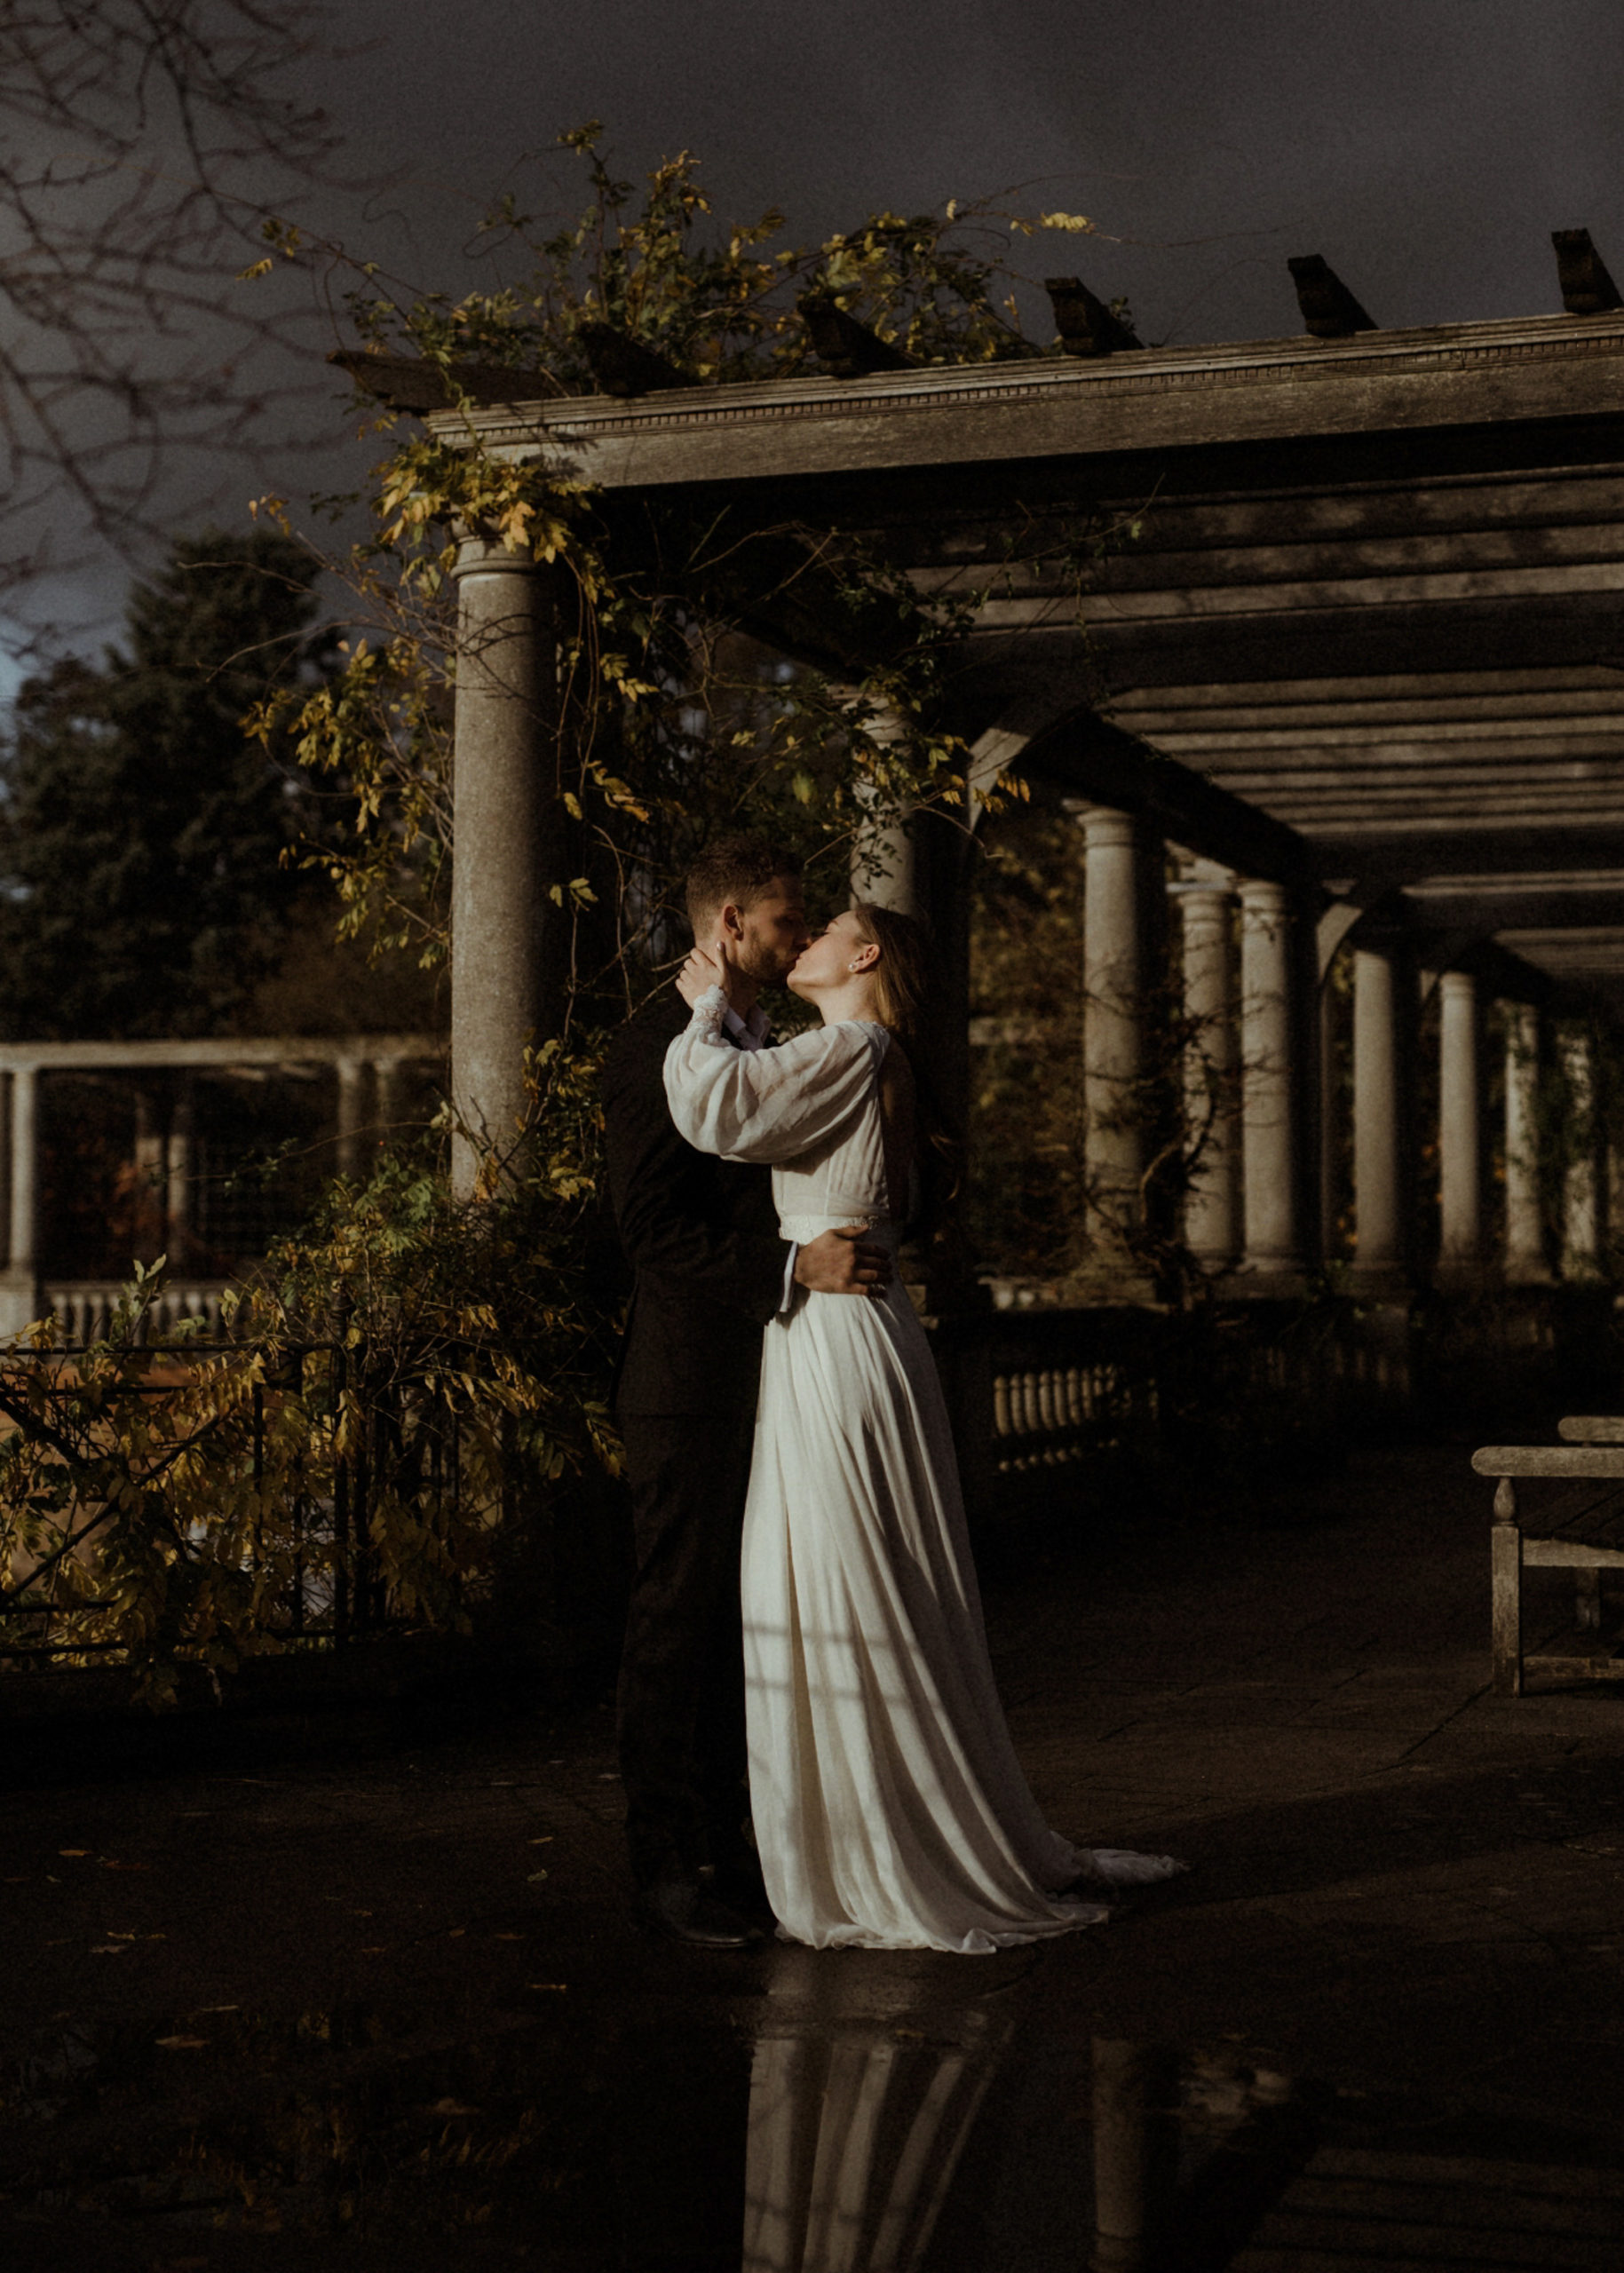 Bride and groom embracing in European chateau